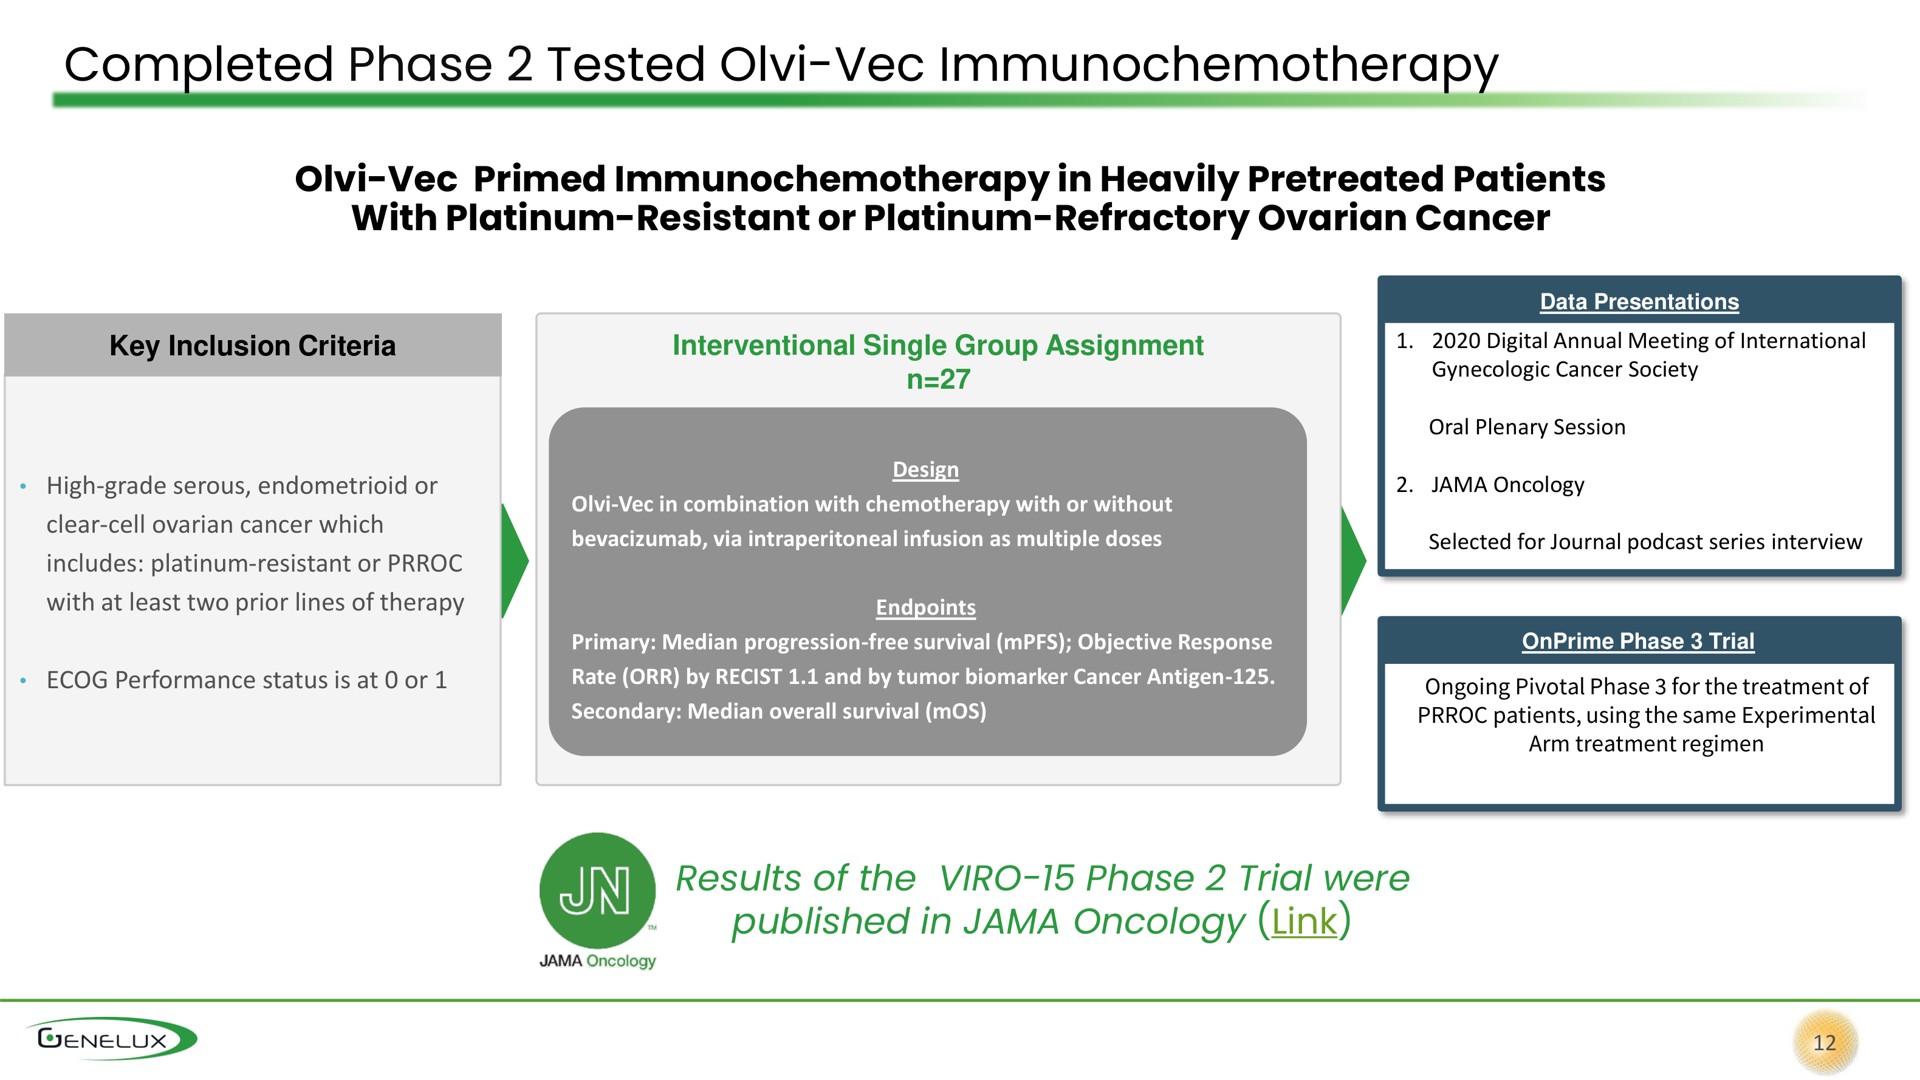 completed phase tested published in jama oncology link | Genelux